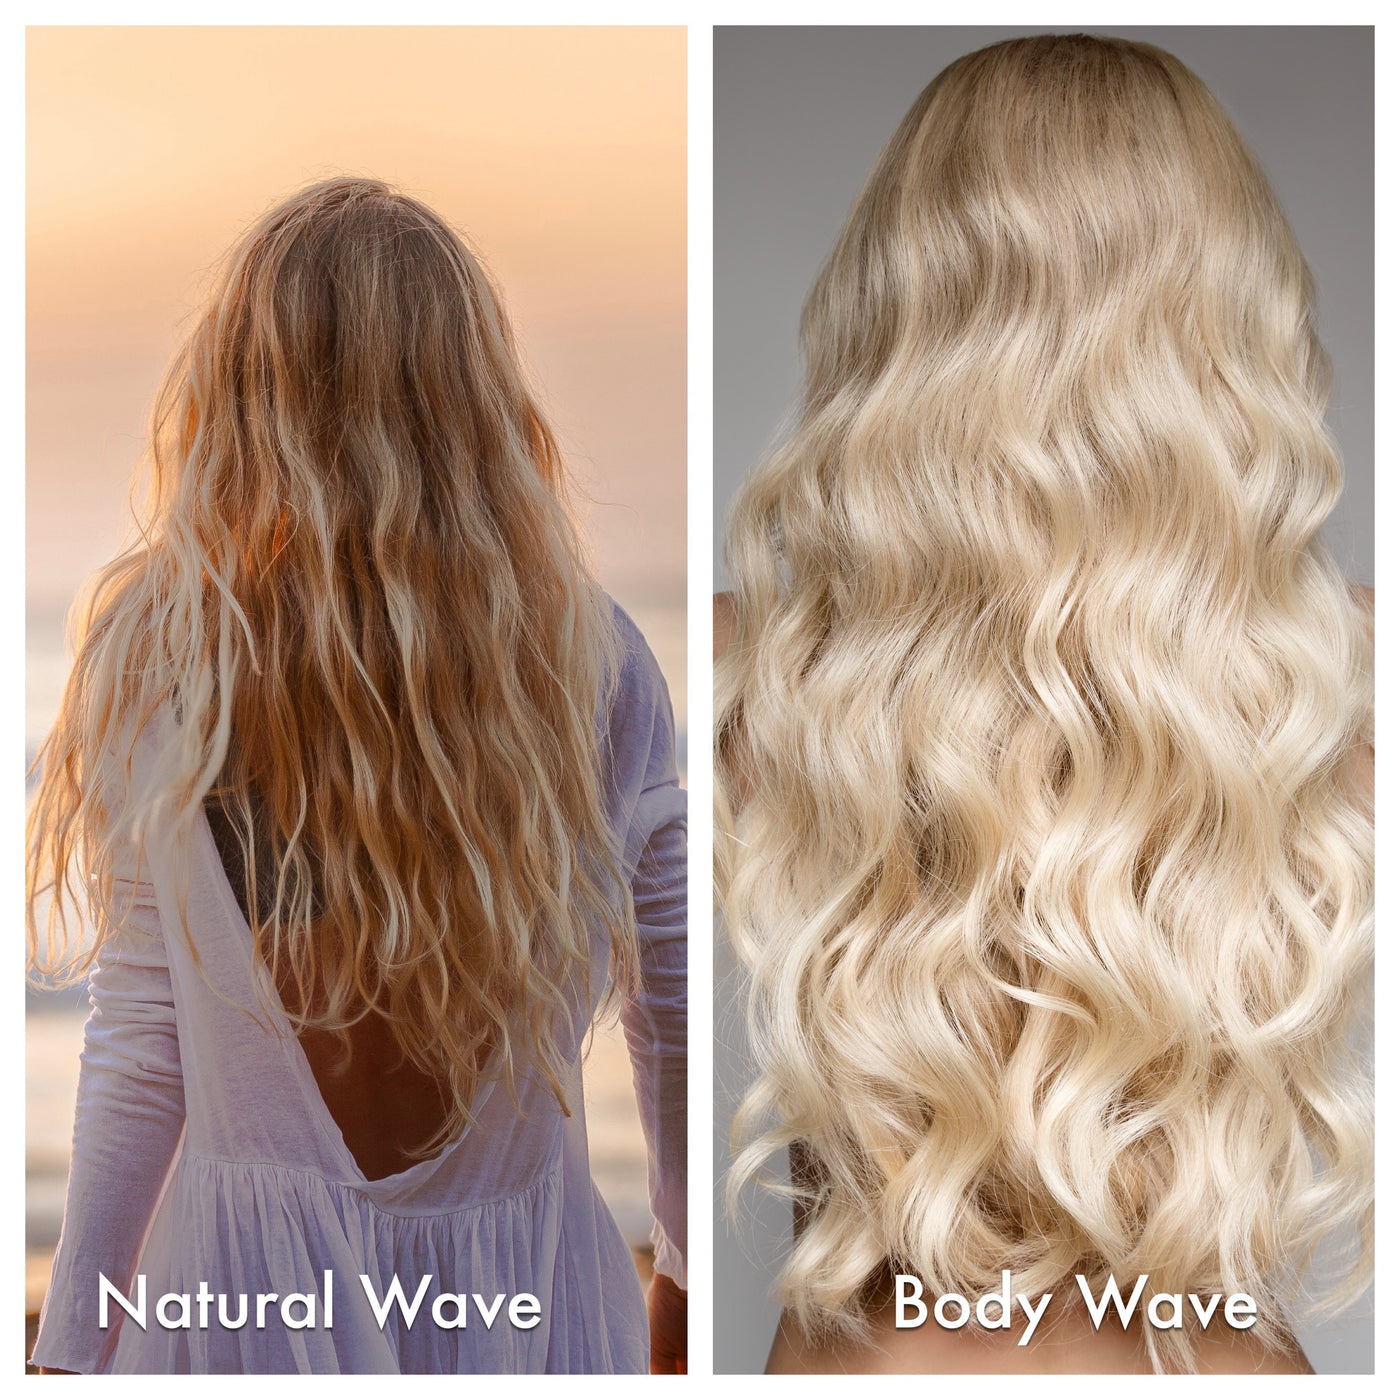 LUXE Wave Weft Hair Extensions | #4 - Sultry